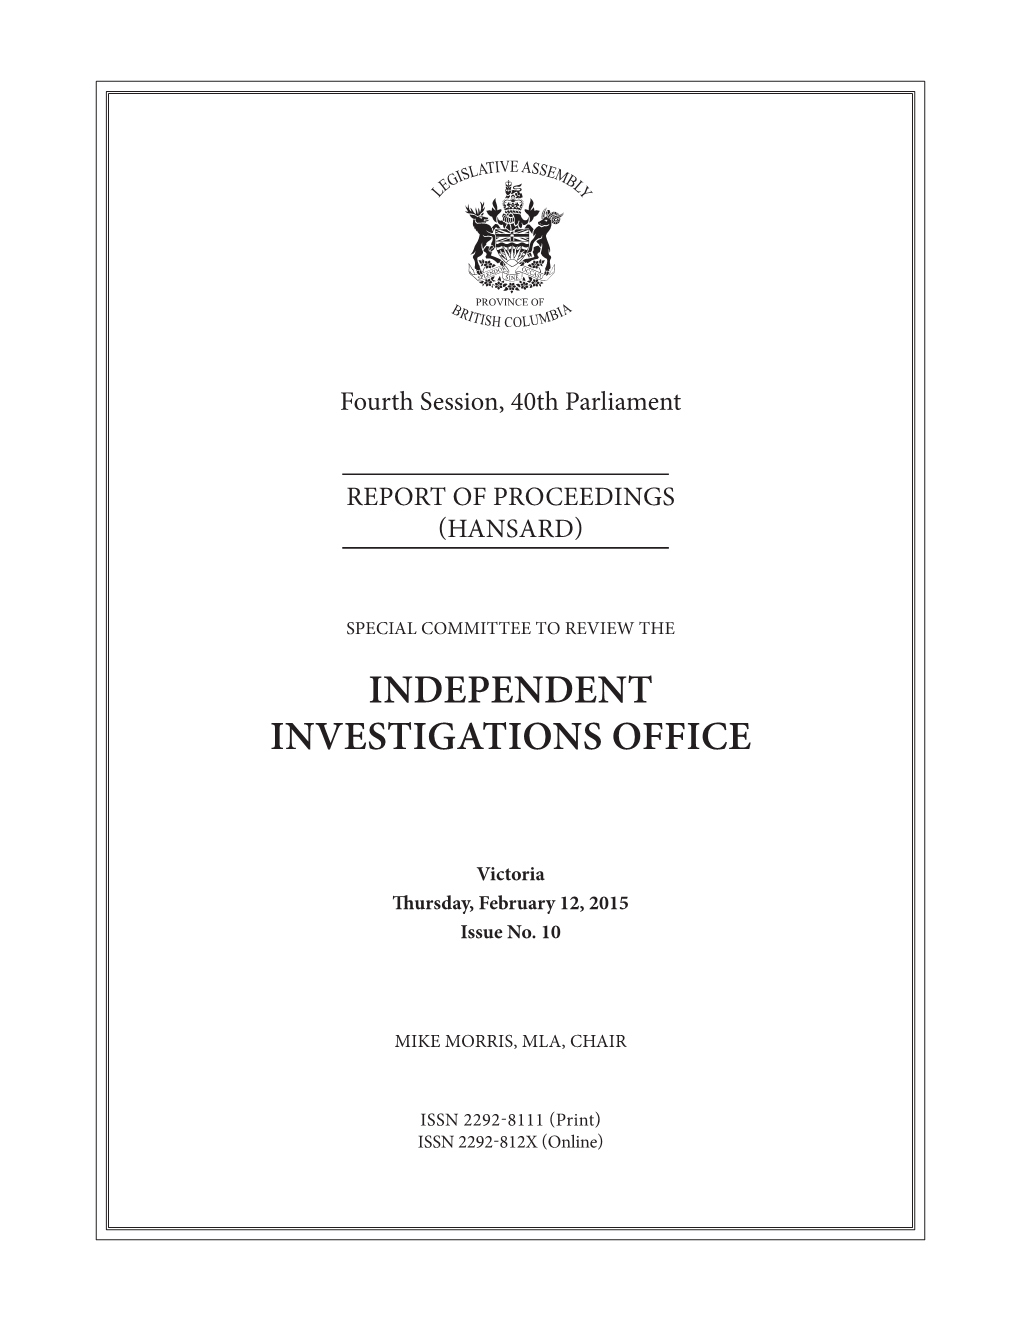 Independent Investigations Office